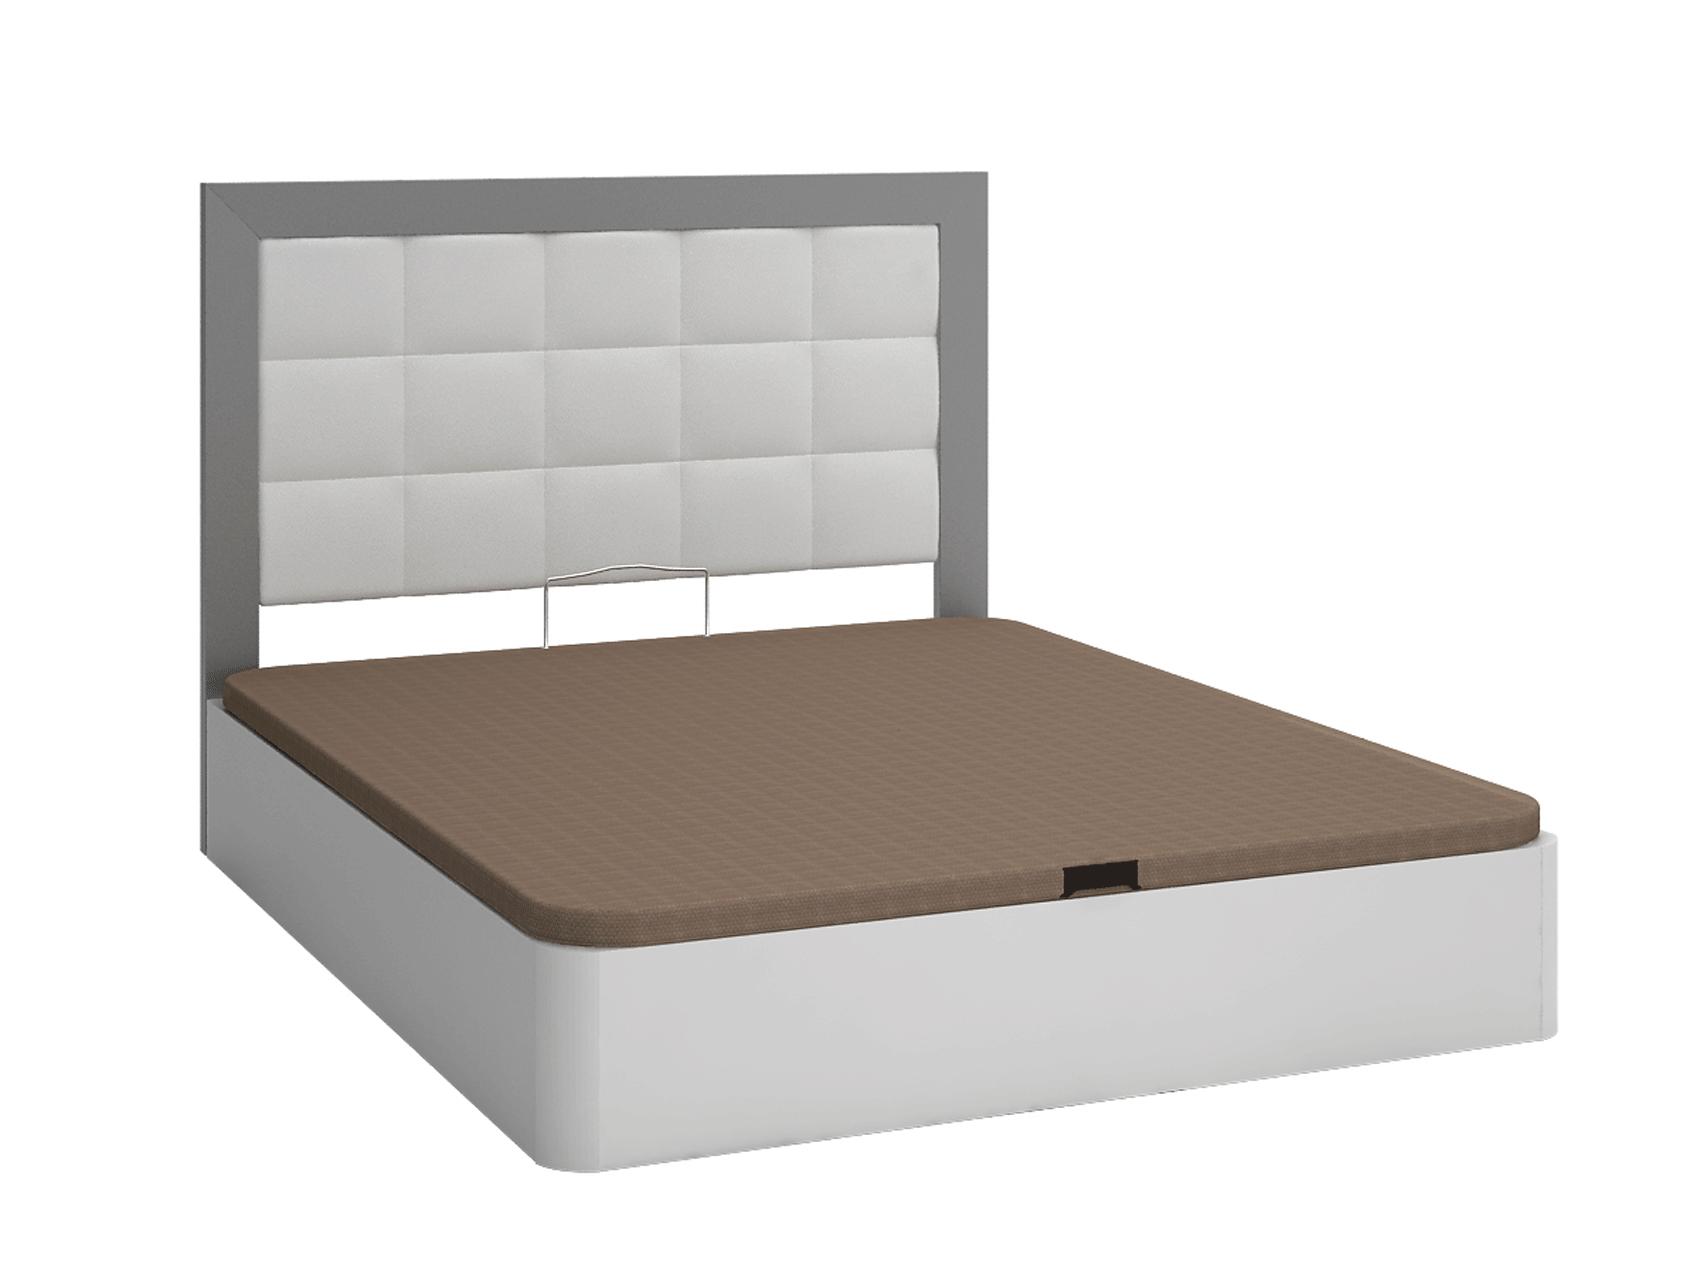 

    
MARGOQSBED-Q-Set4 White & Grey Eco Leather Margo Queen Storage Bedroom Set 4 ESF MADE IN SPAIN
